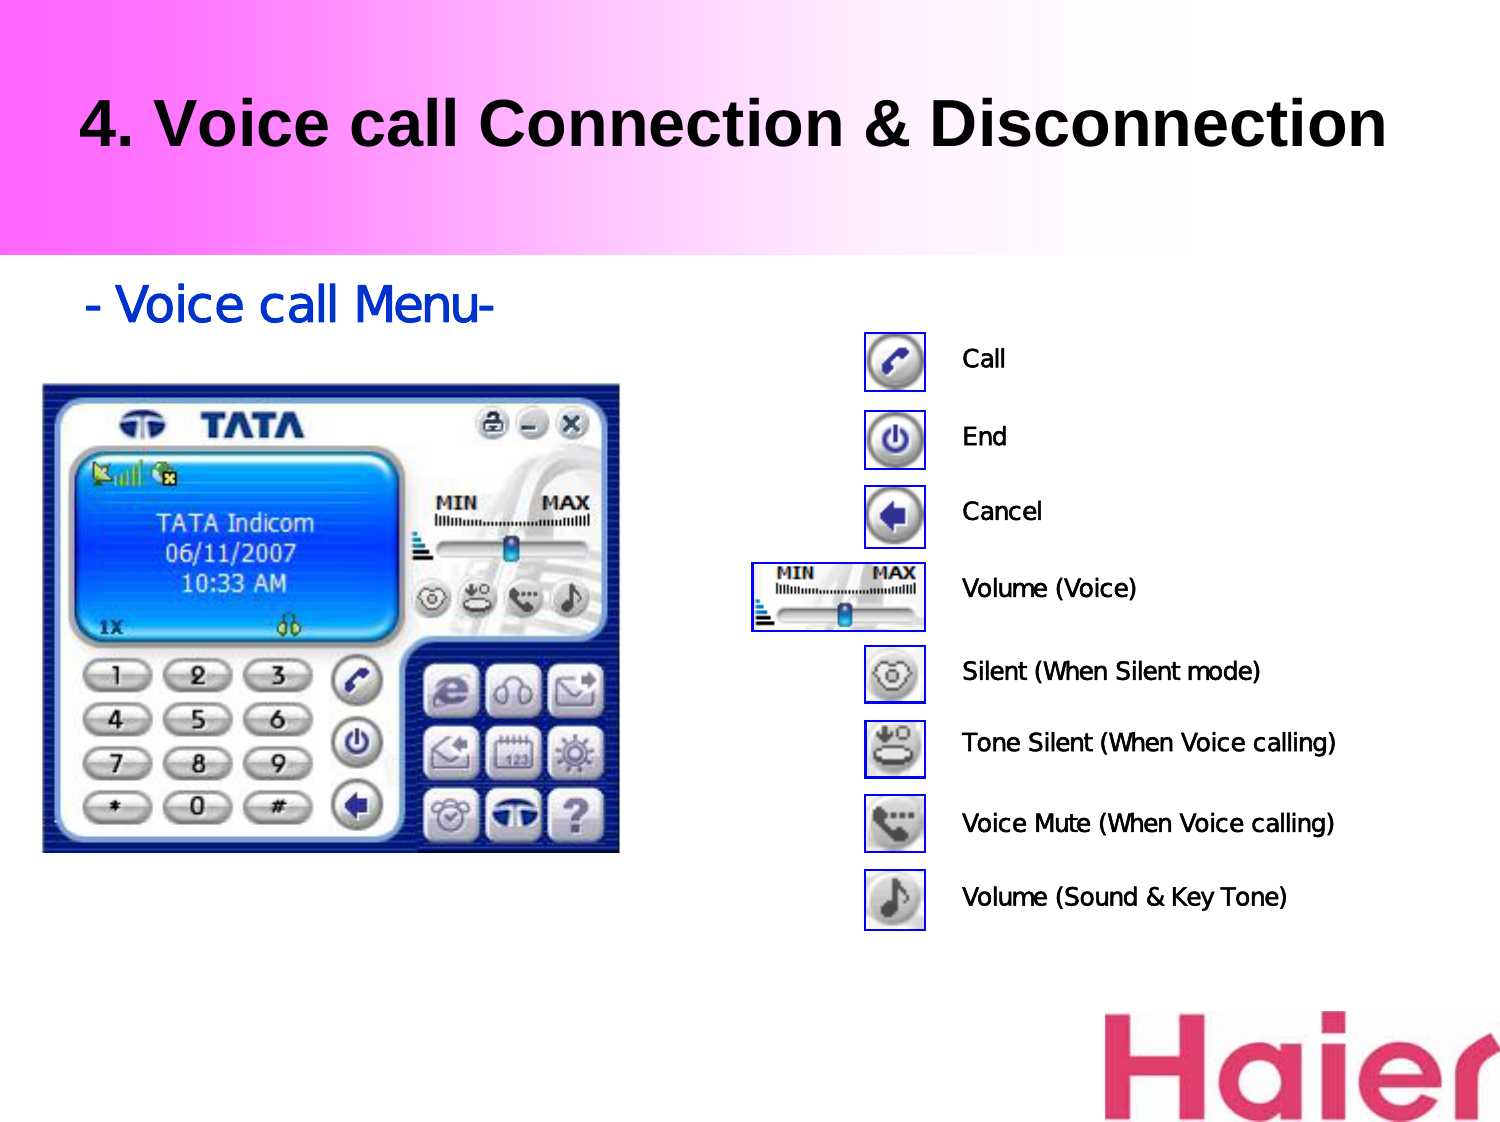 4. Voice call Connection &amp; DisconnectionCall End Cancel Volume (Voice)Silent (When Silent mode)Tone Silent (When Voice calling)Voice Mute (When Voice calling)Volume (Sound &amp; Key Tone)-Voice call Menu-